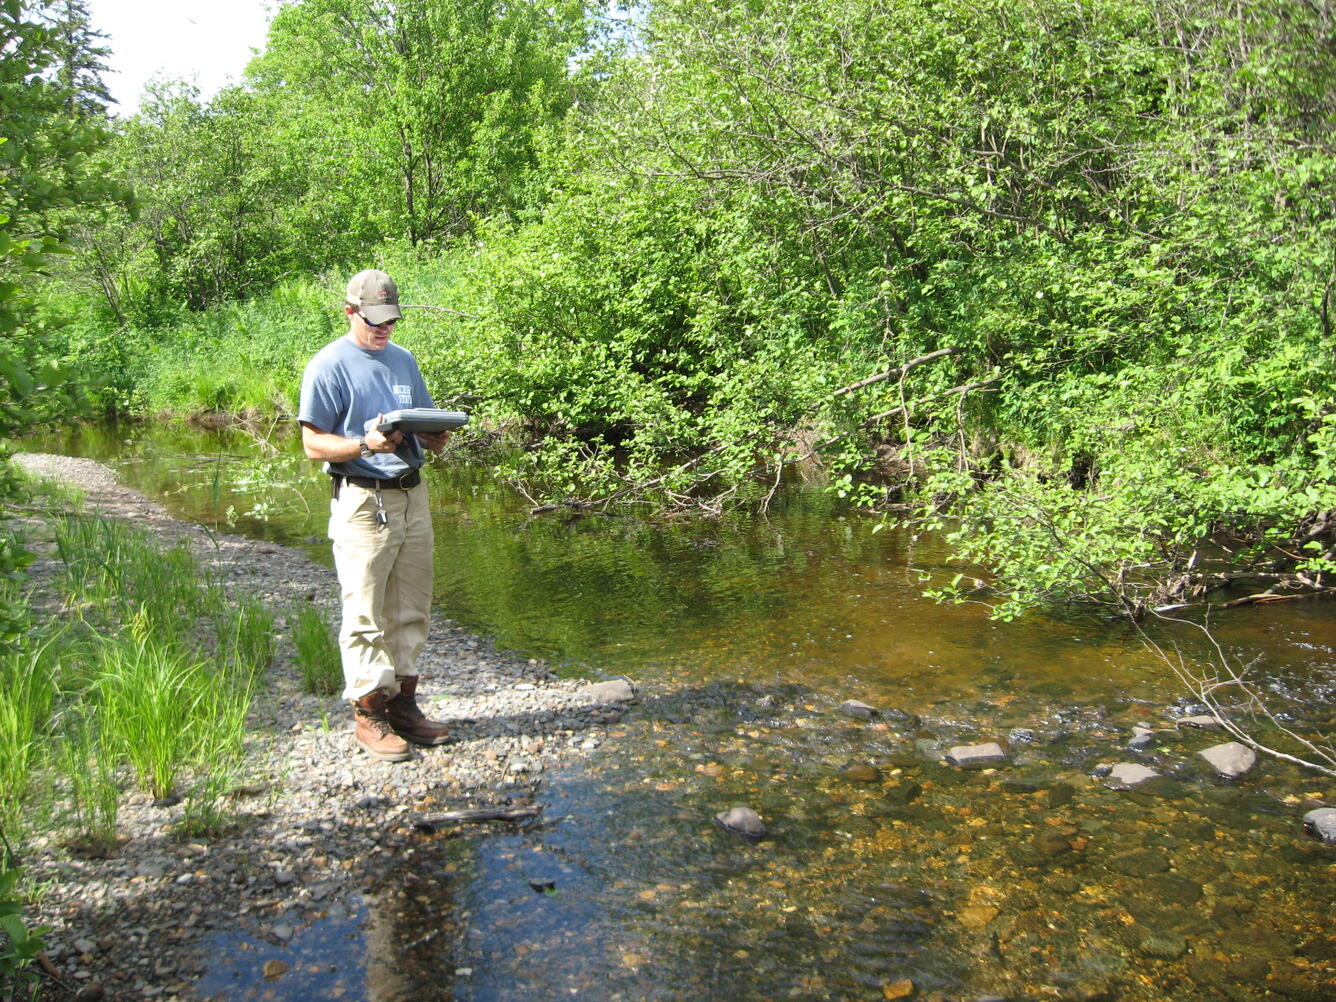 USGS technician monitoring a low flow in a stream while standing on a pebble island in stream in summer.